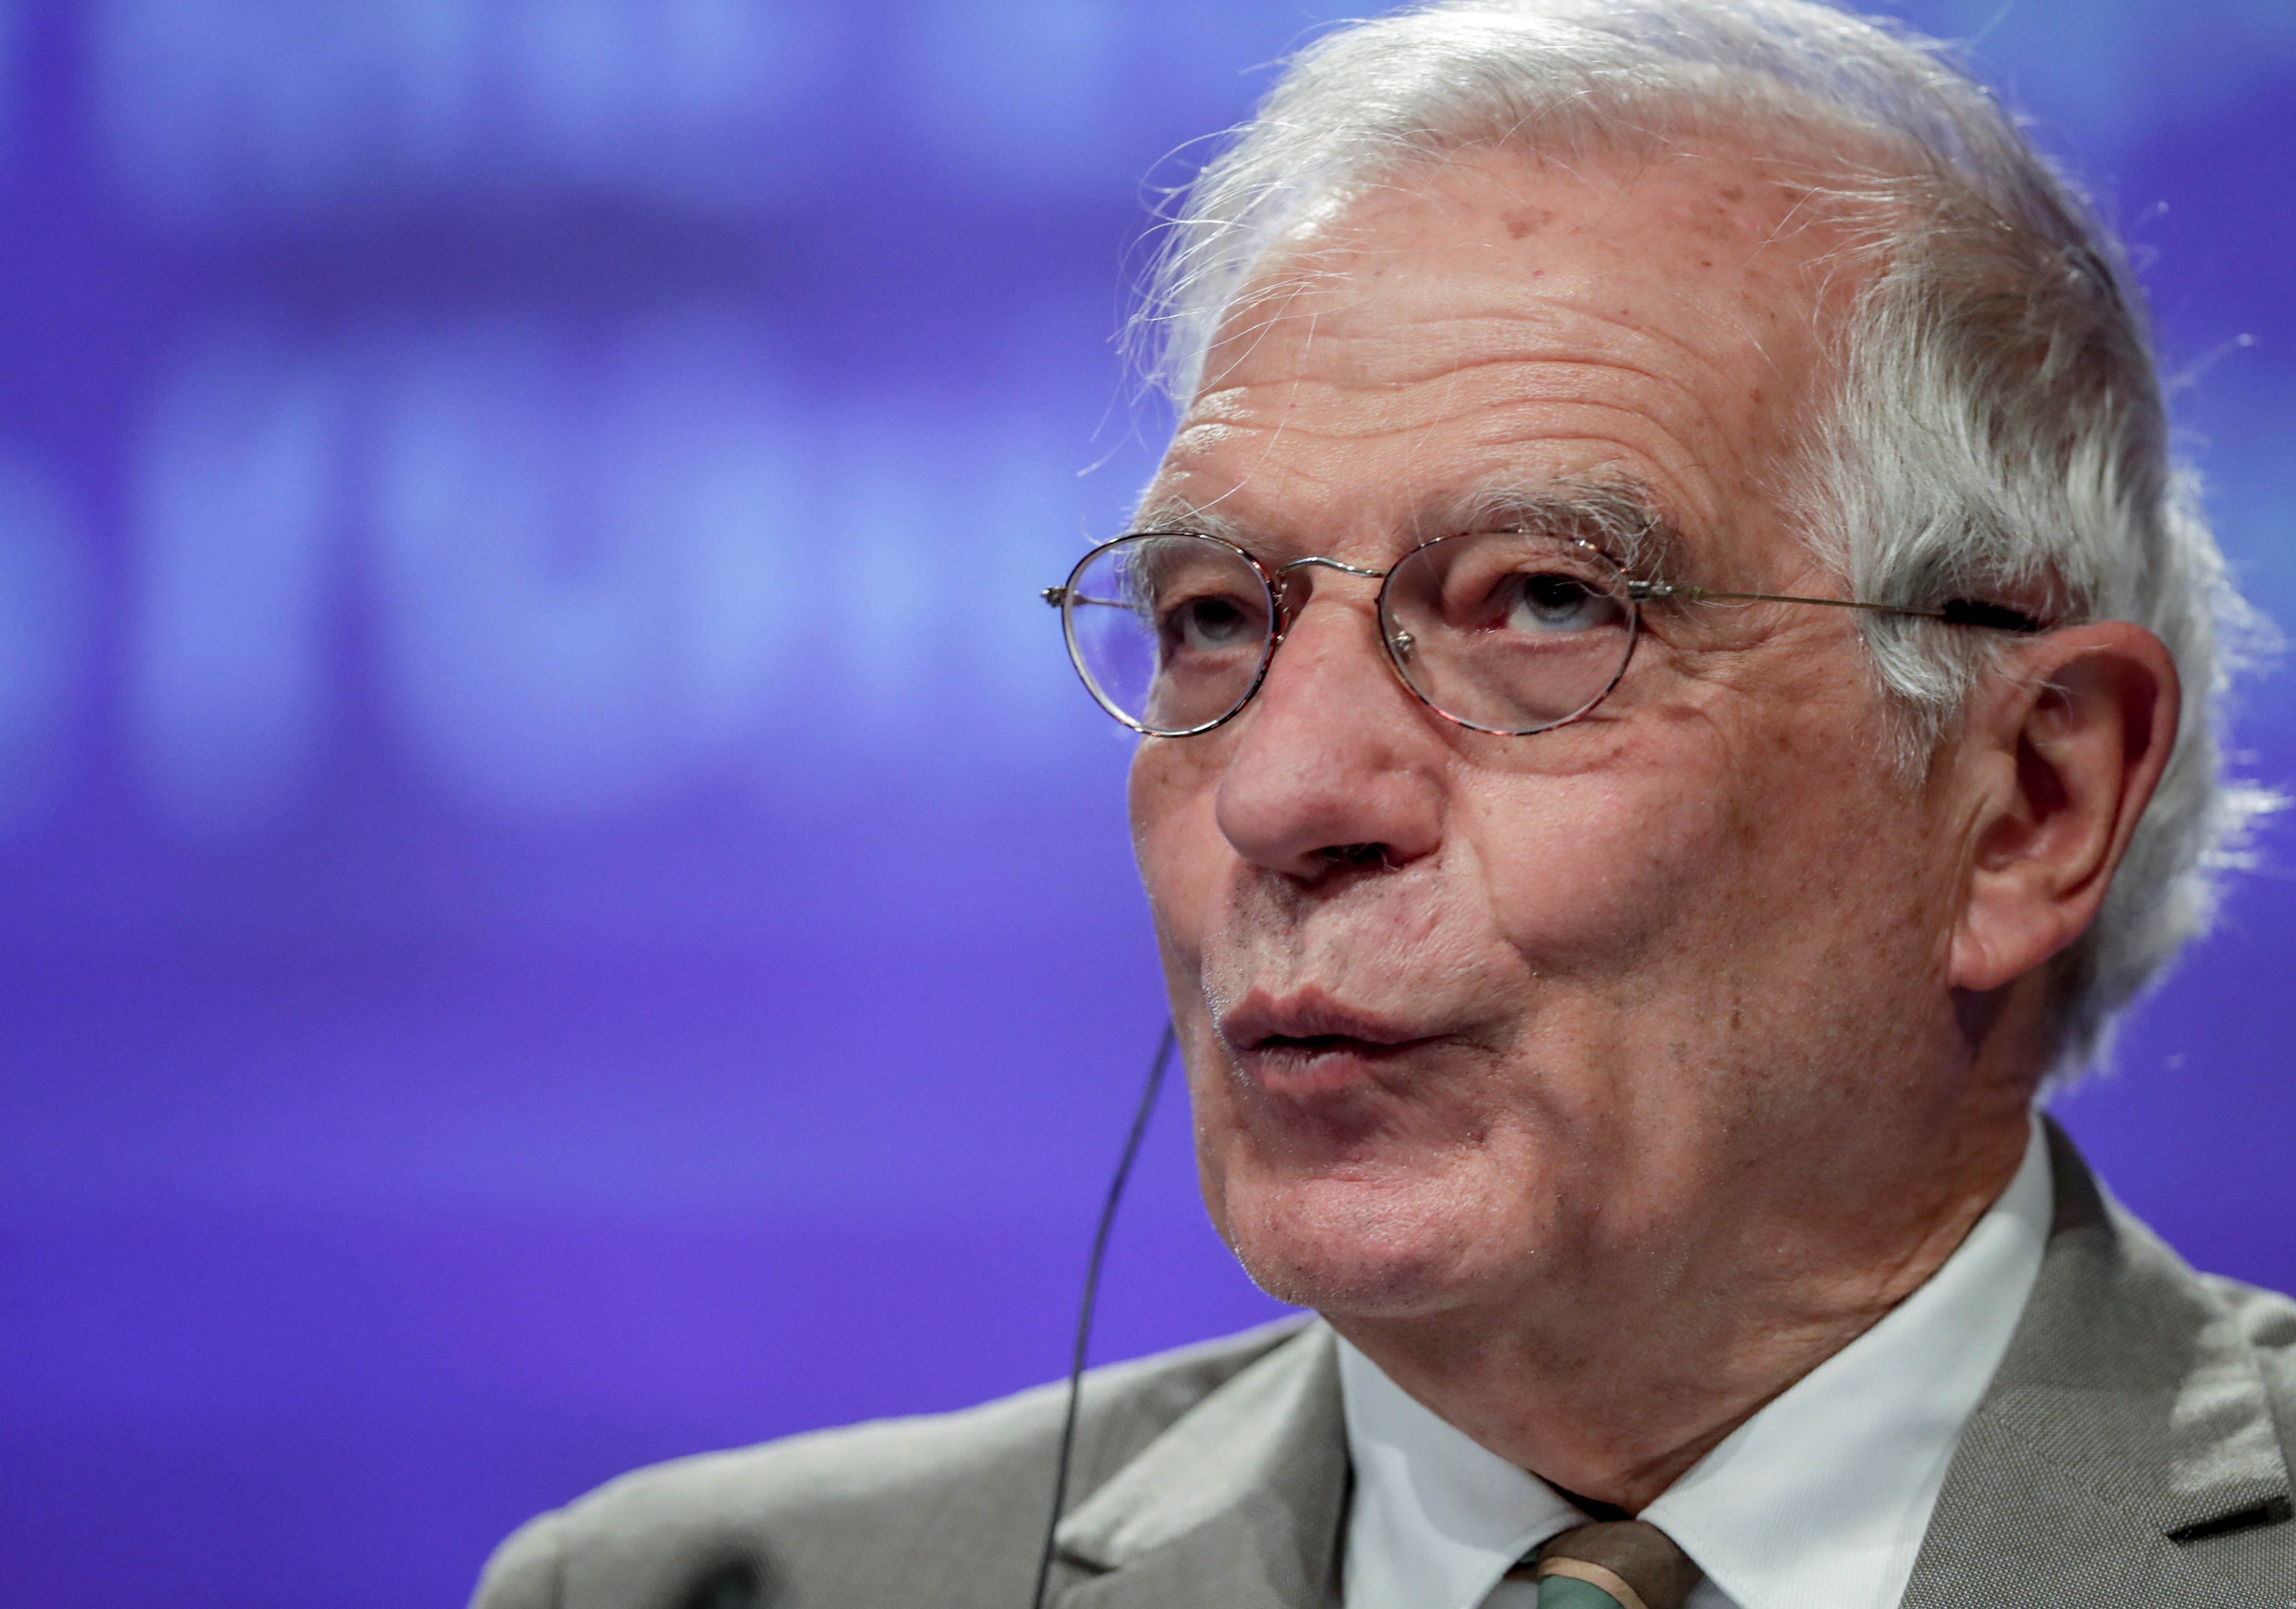 Josep Borrell's support for investigated ex-minister reaches European Commission